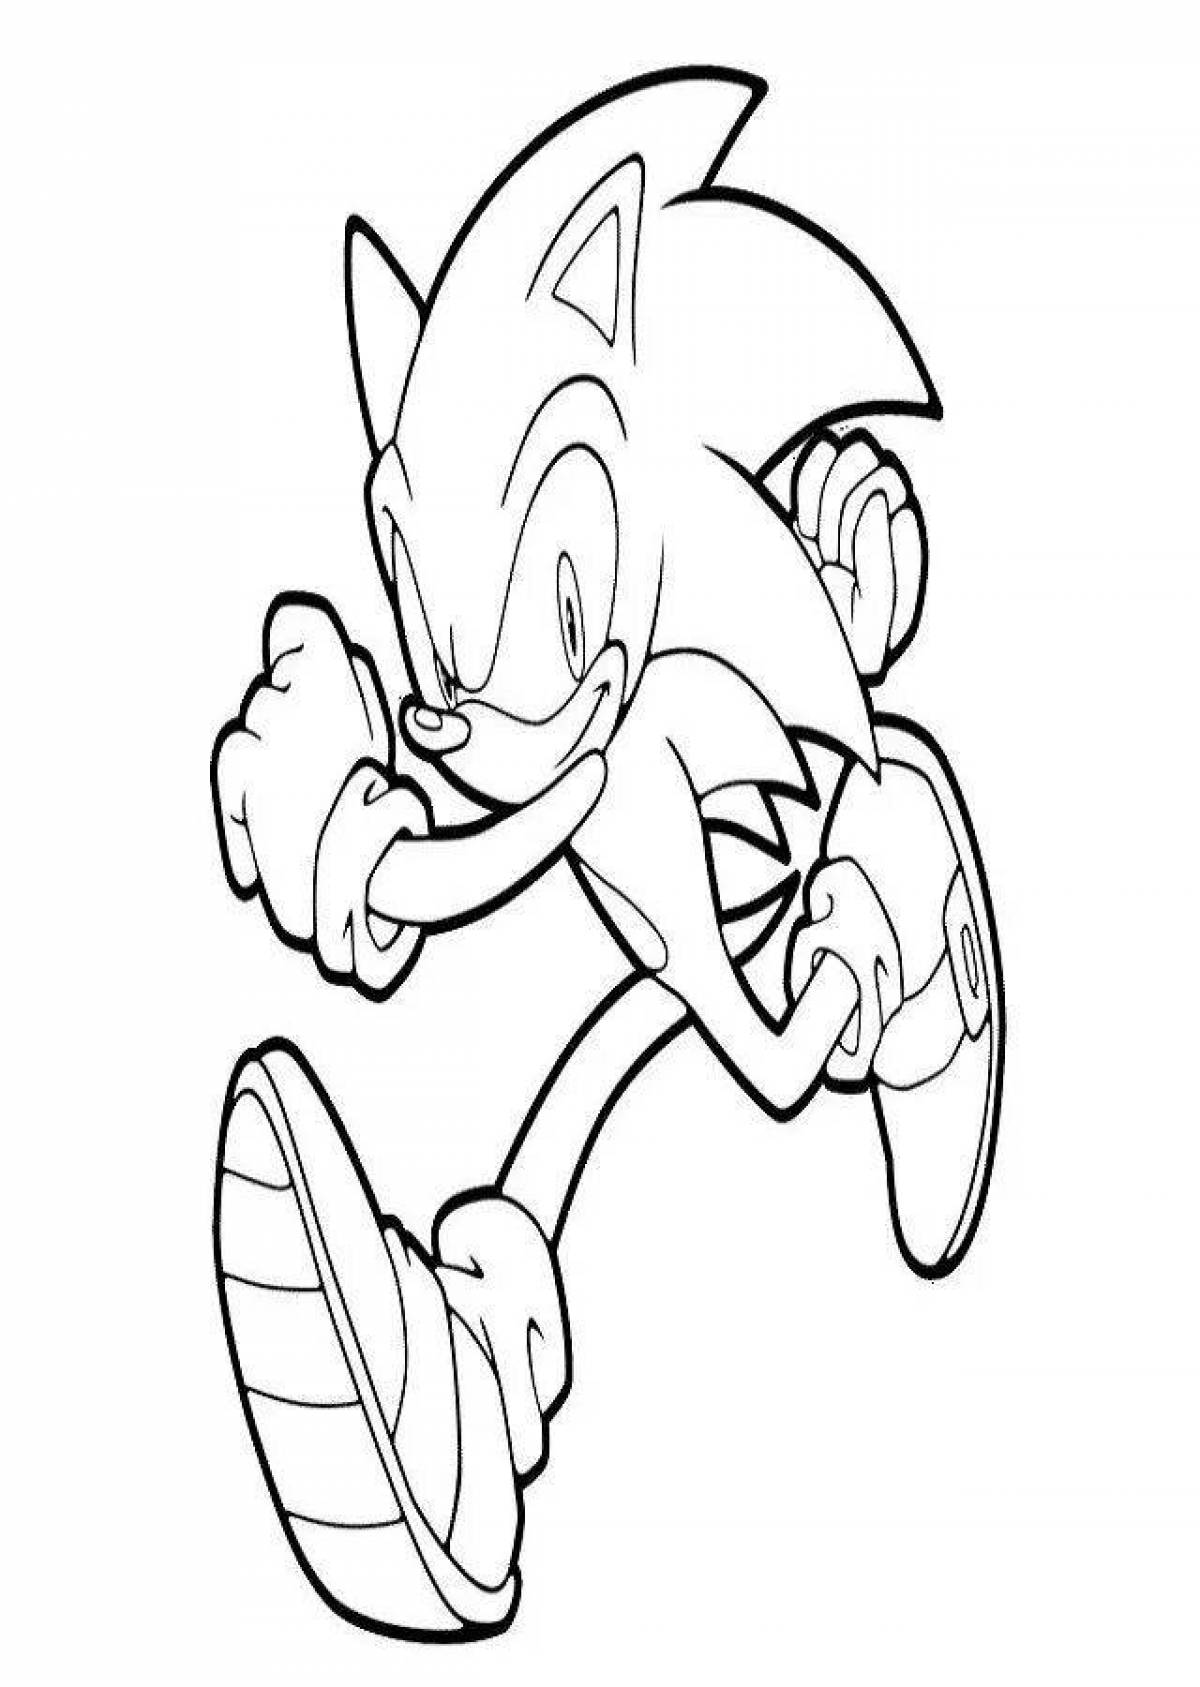 Sparkling sonic exe coloring book